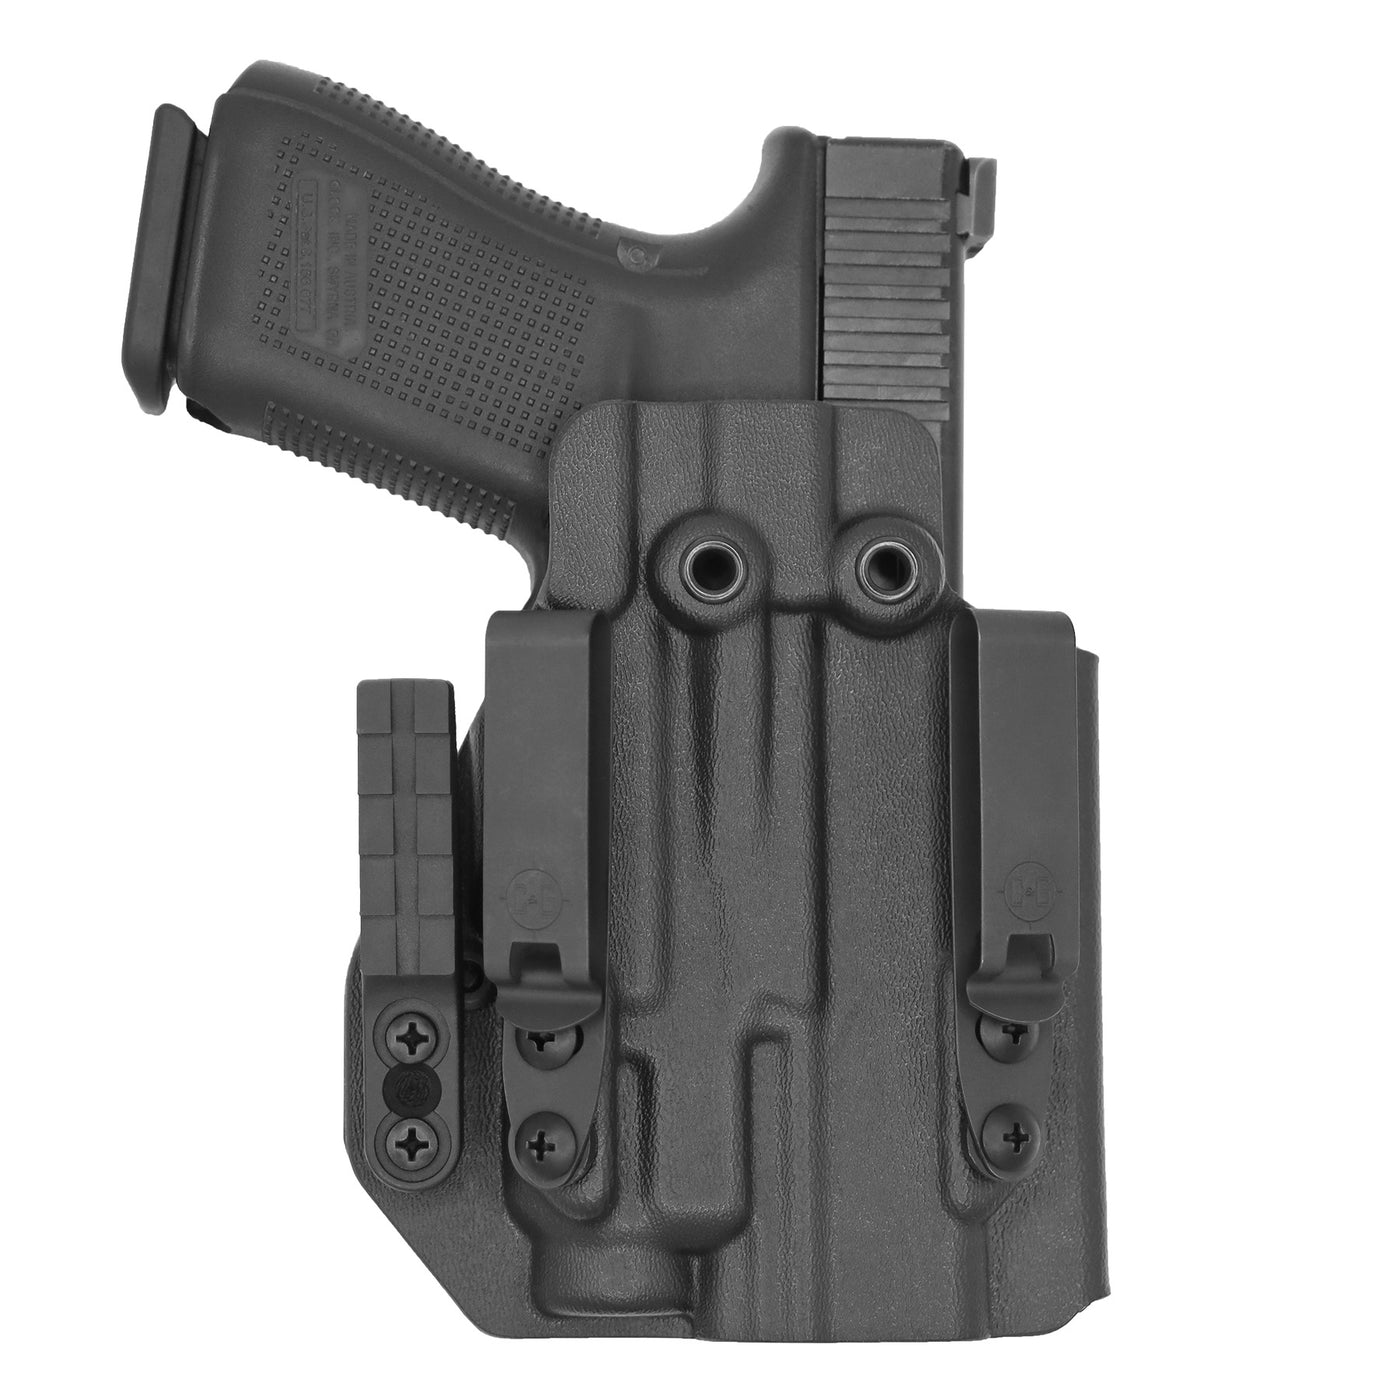 C&G Holsters quickship IWB ALPHA UPGRADE Tactical OZ9/c streamlight tlr7/a in holstered position